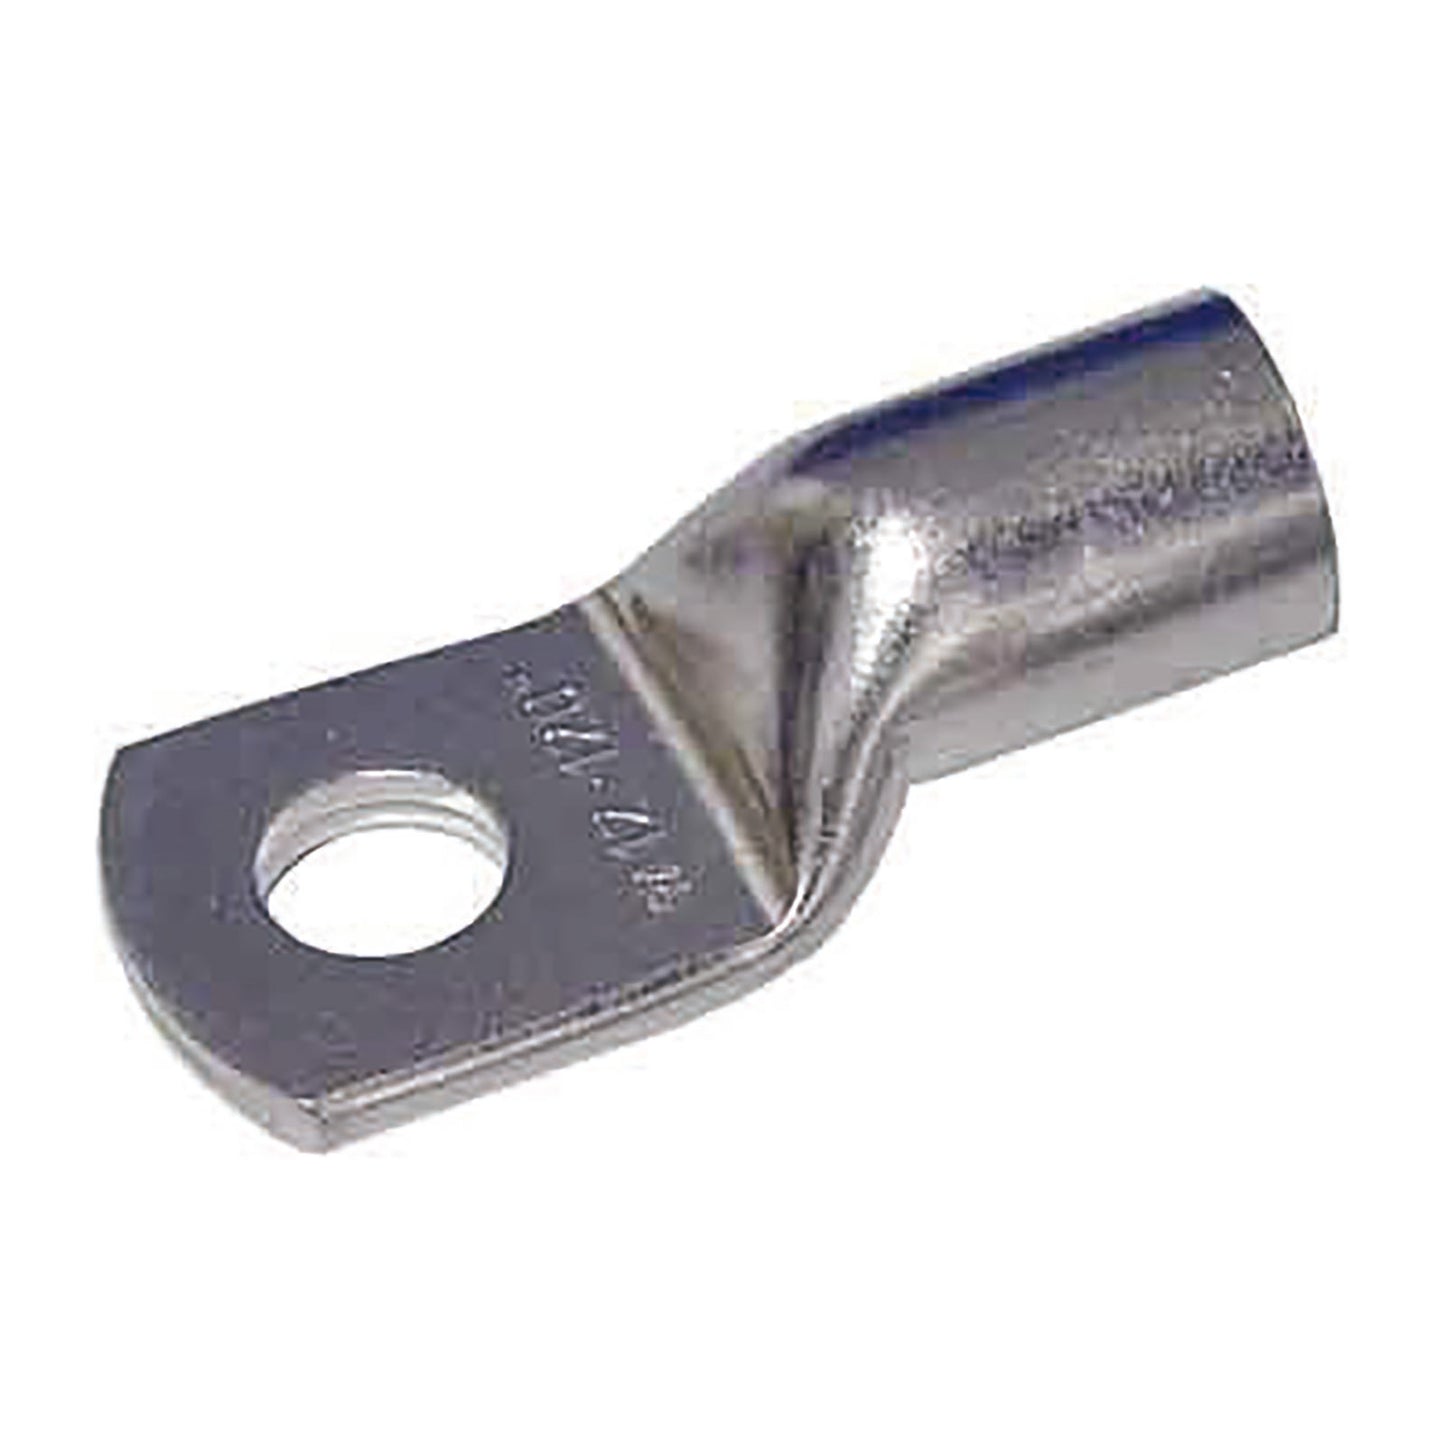 GEDORE 8152 - Notching Clamp 4-25 mm2 (2010313)